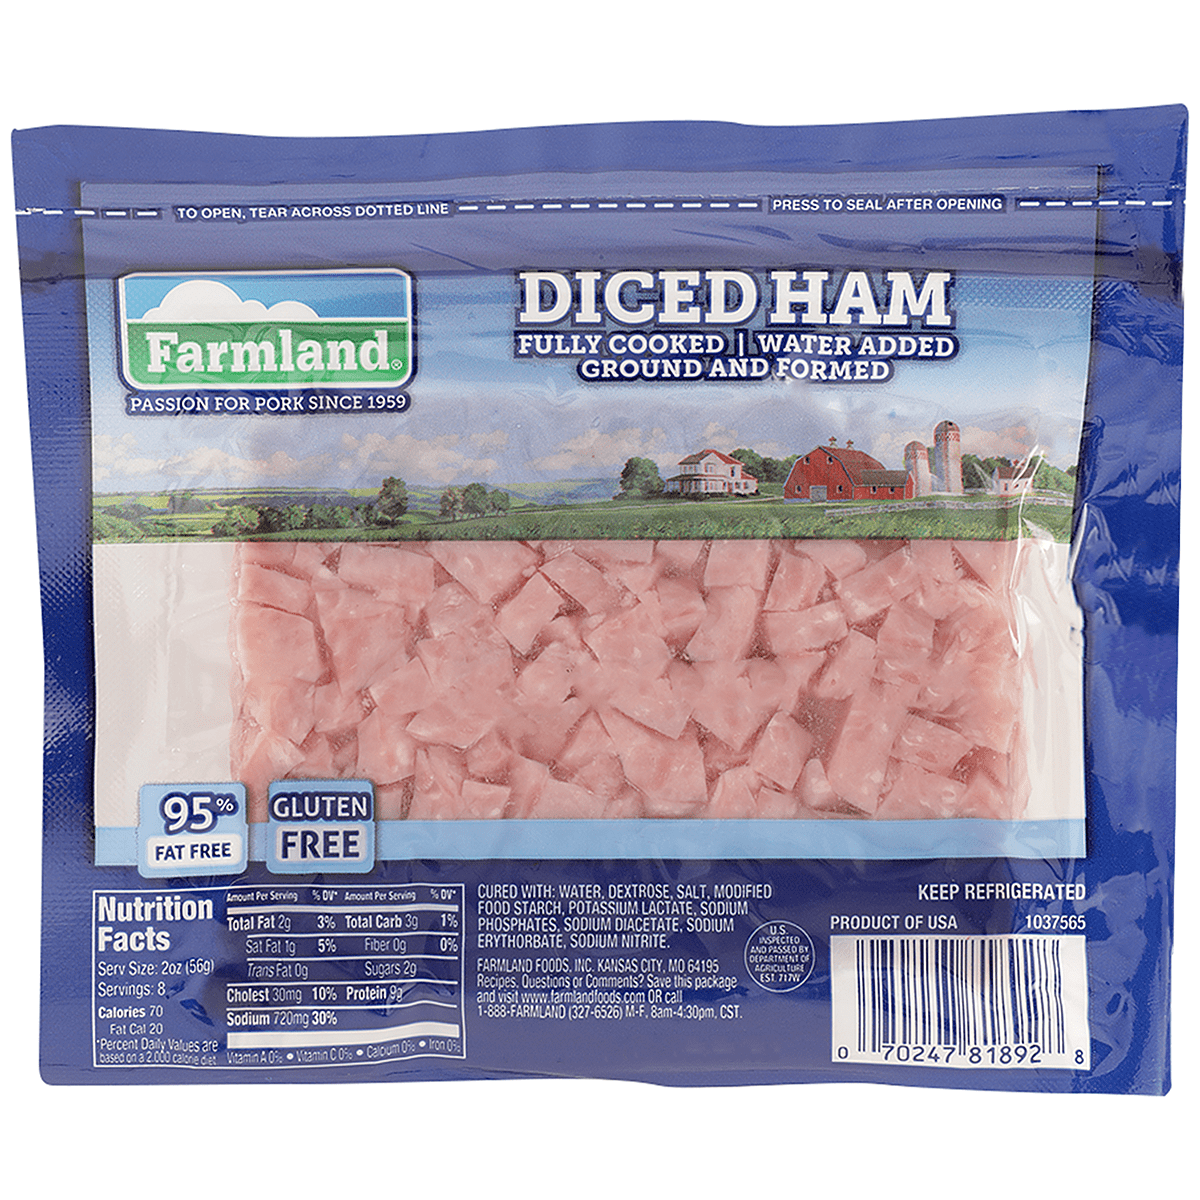 Farmland Fully Cooked Diced Ham 16 Oz Walmart Com Walmart Com,How To Clean Hats With Sweat Stains